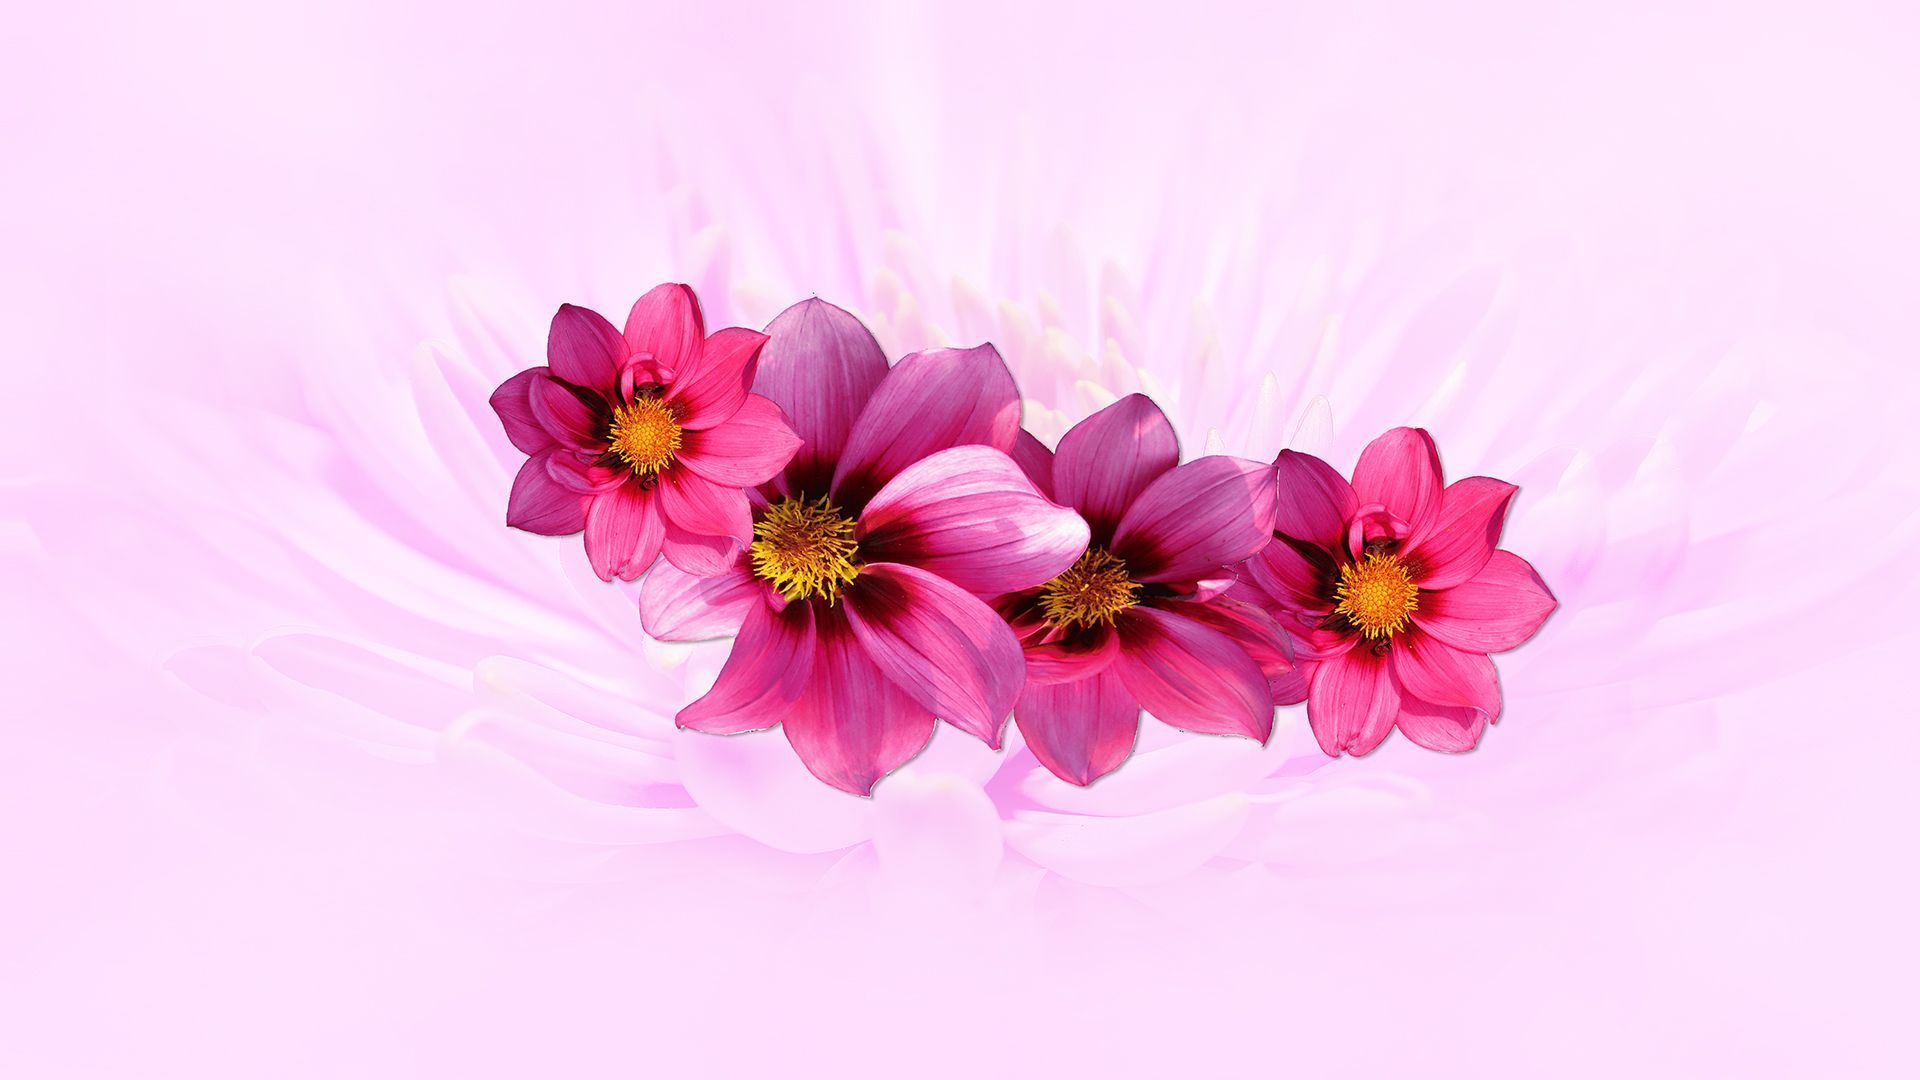 A pink flower with three petals on it - Chromebook